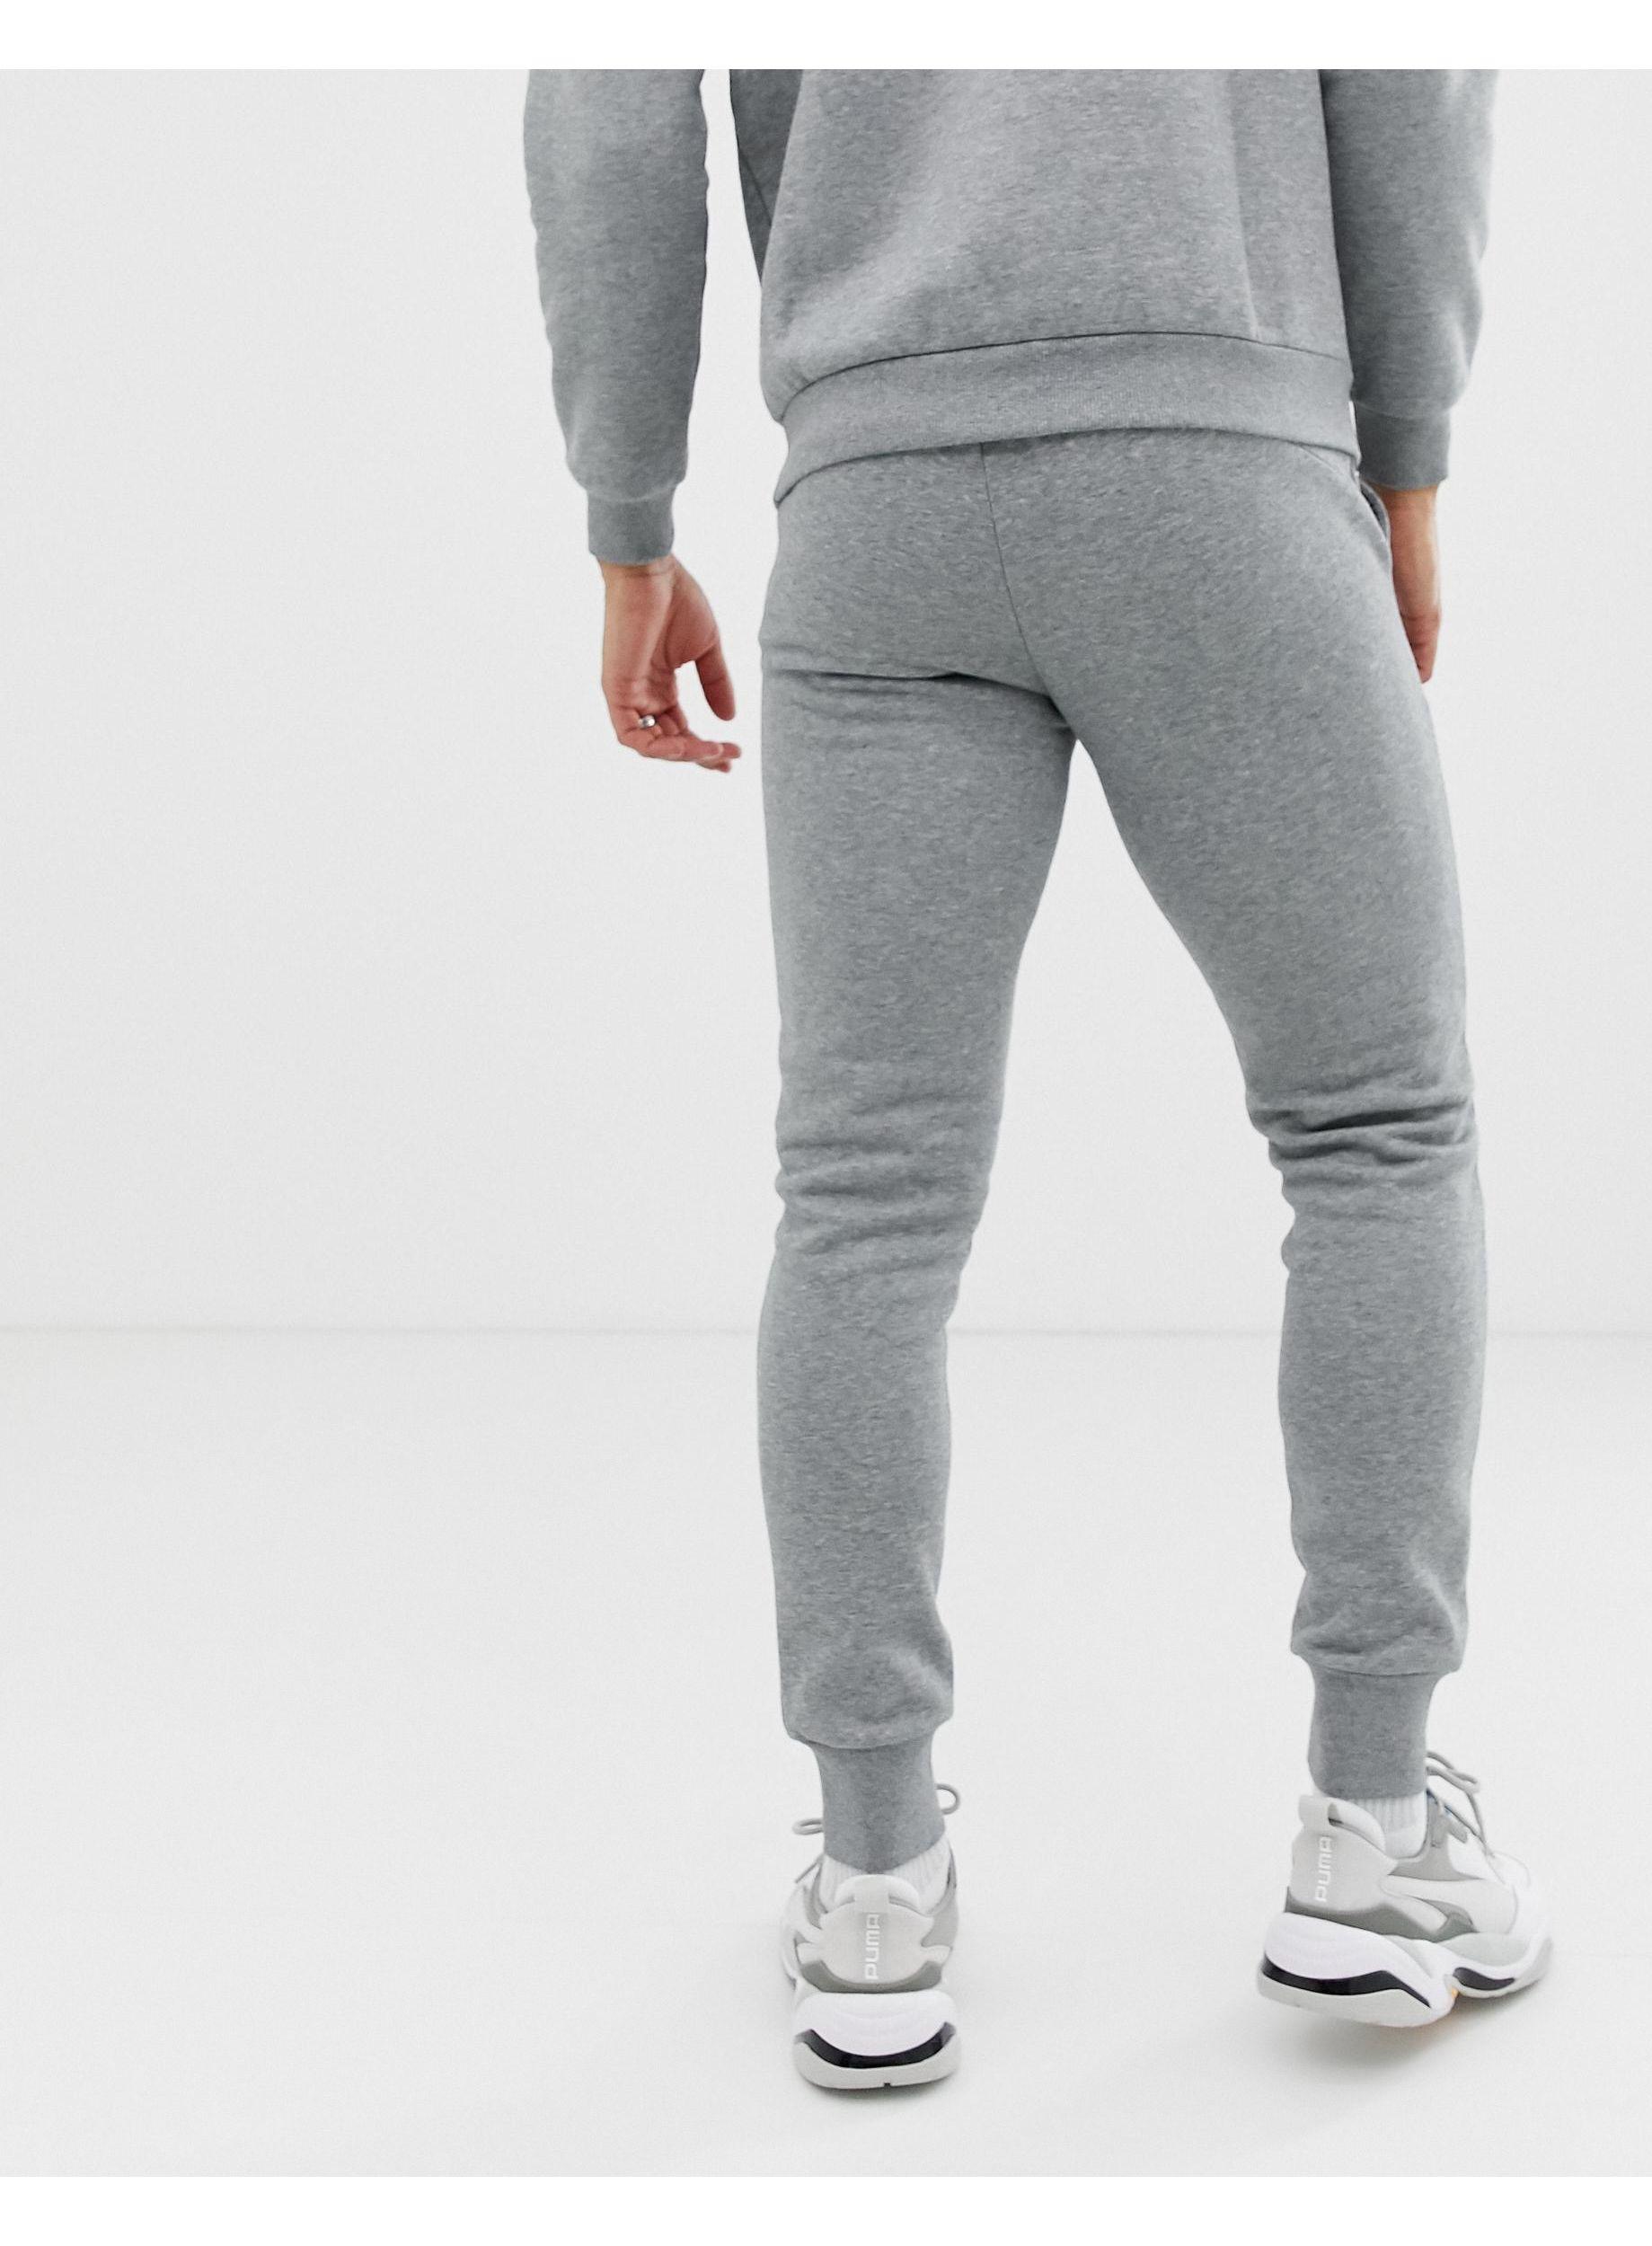 PUMA Cotton Essentials Skinny Fit Sweatpants in Grey (Grey) for Men - Save  32% | Lyst UK